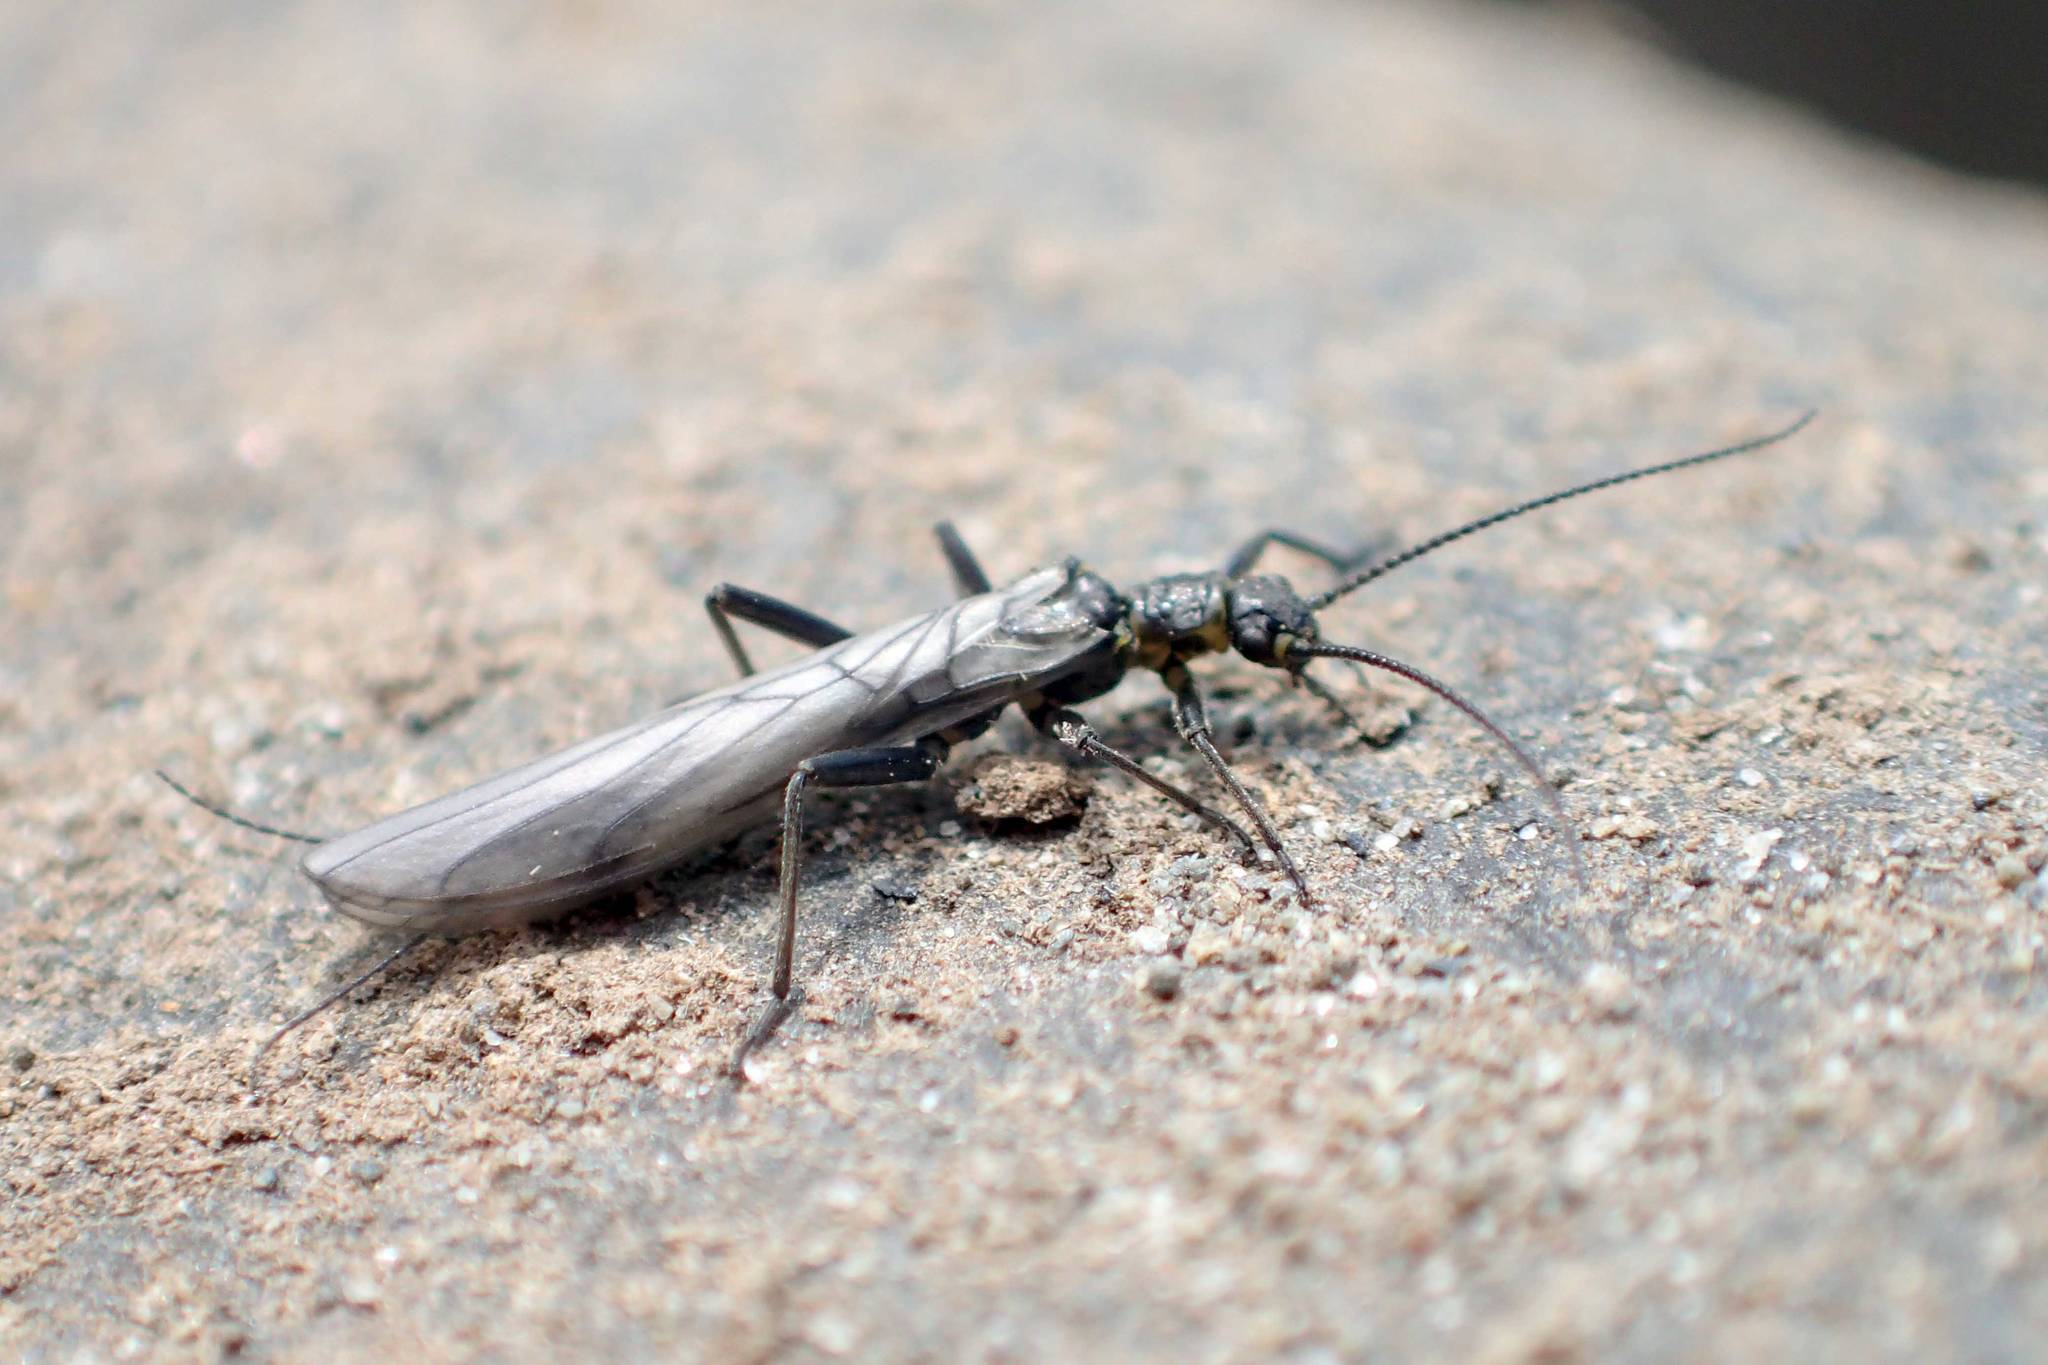 A Columbian snowfly recently emerged from the Kenai River at Soldotna Creek Park on March 29, 2019, in Soldotna, Alaska. (Photo by Matt Bowser/USFWS)